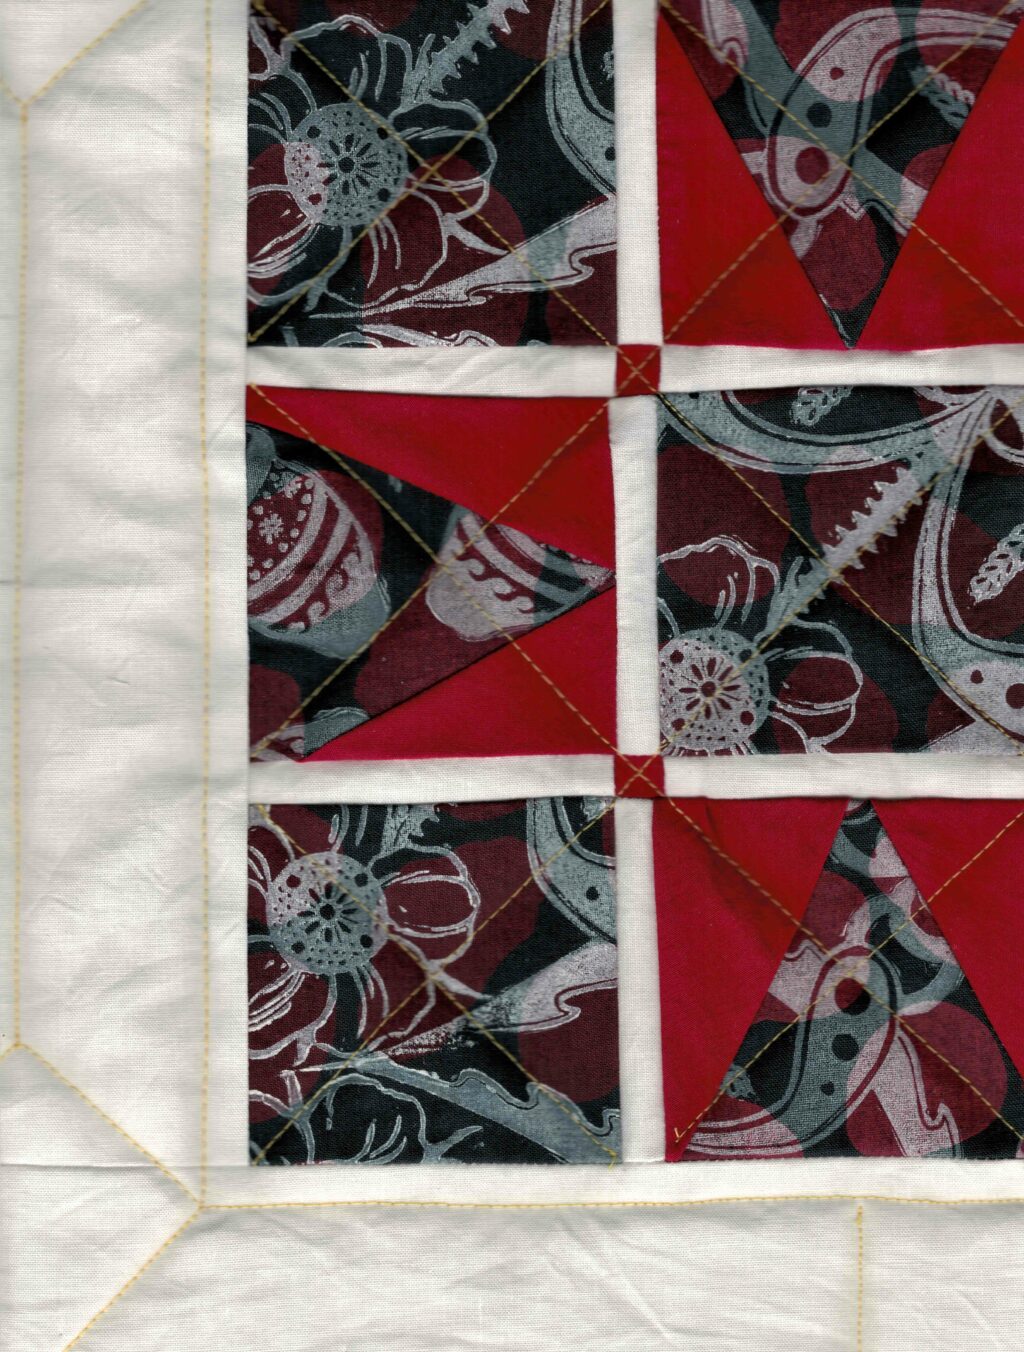 Cropped view of a quilt with squares of printed fabric and red triangles forming a square star. The squares feature a deep red bAckground and dark blue floral patterns reminiscent of Ukrainian traditional art.